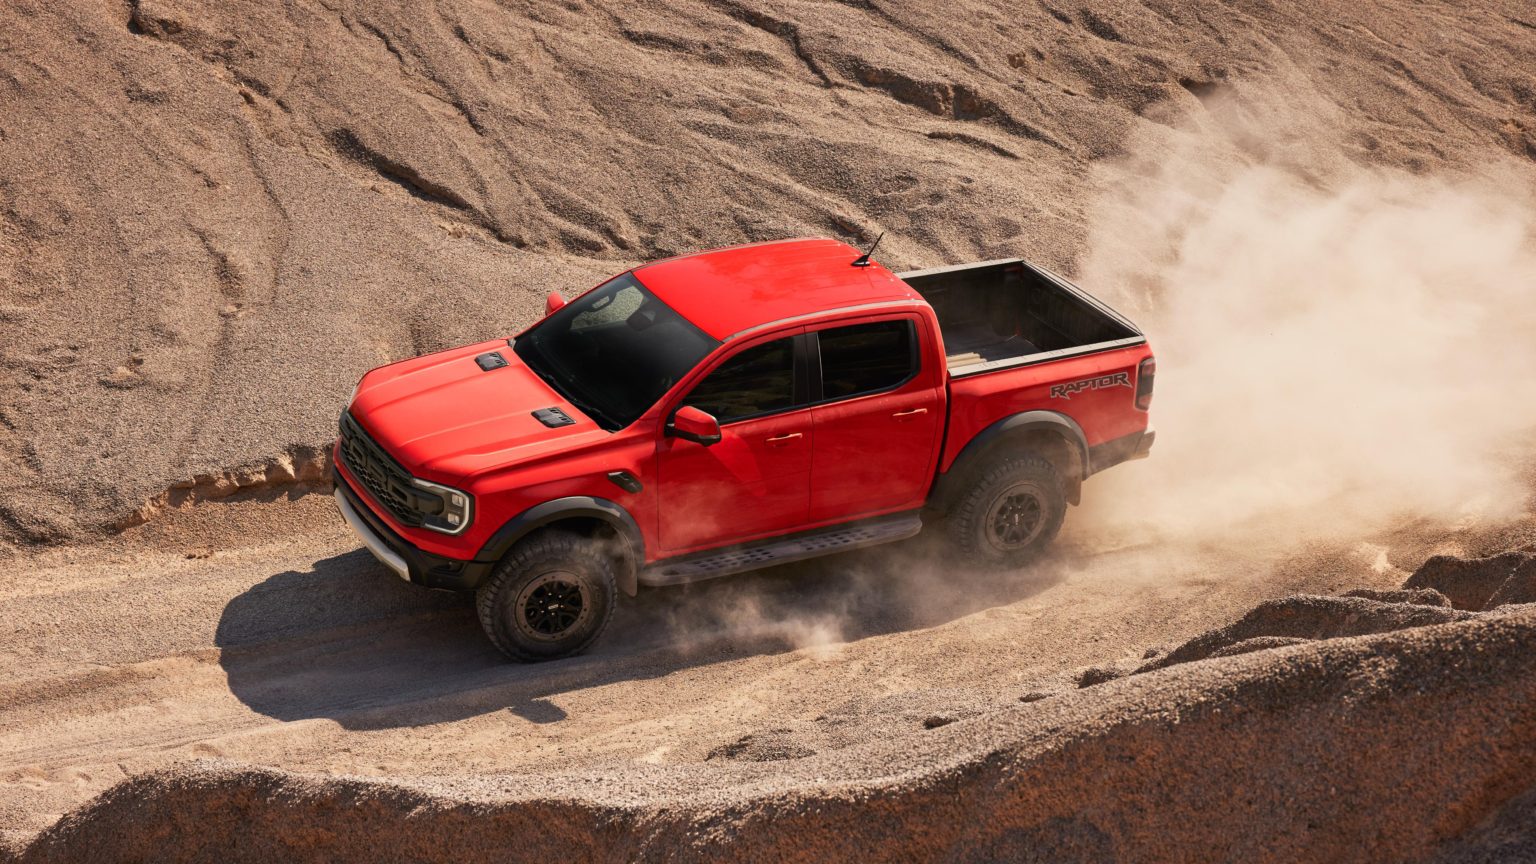 Ford CEO Jim Farley confirmed the harder-core Ranger is coming here next year.